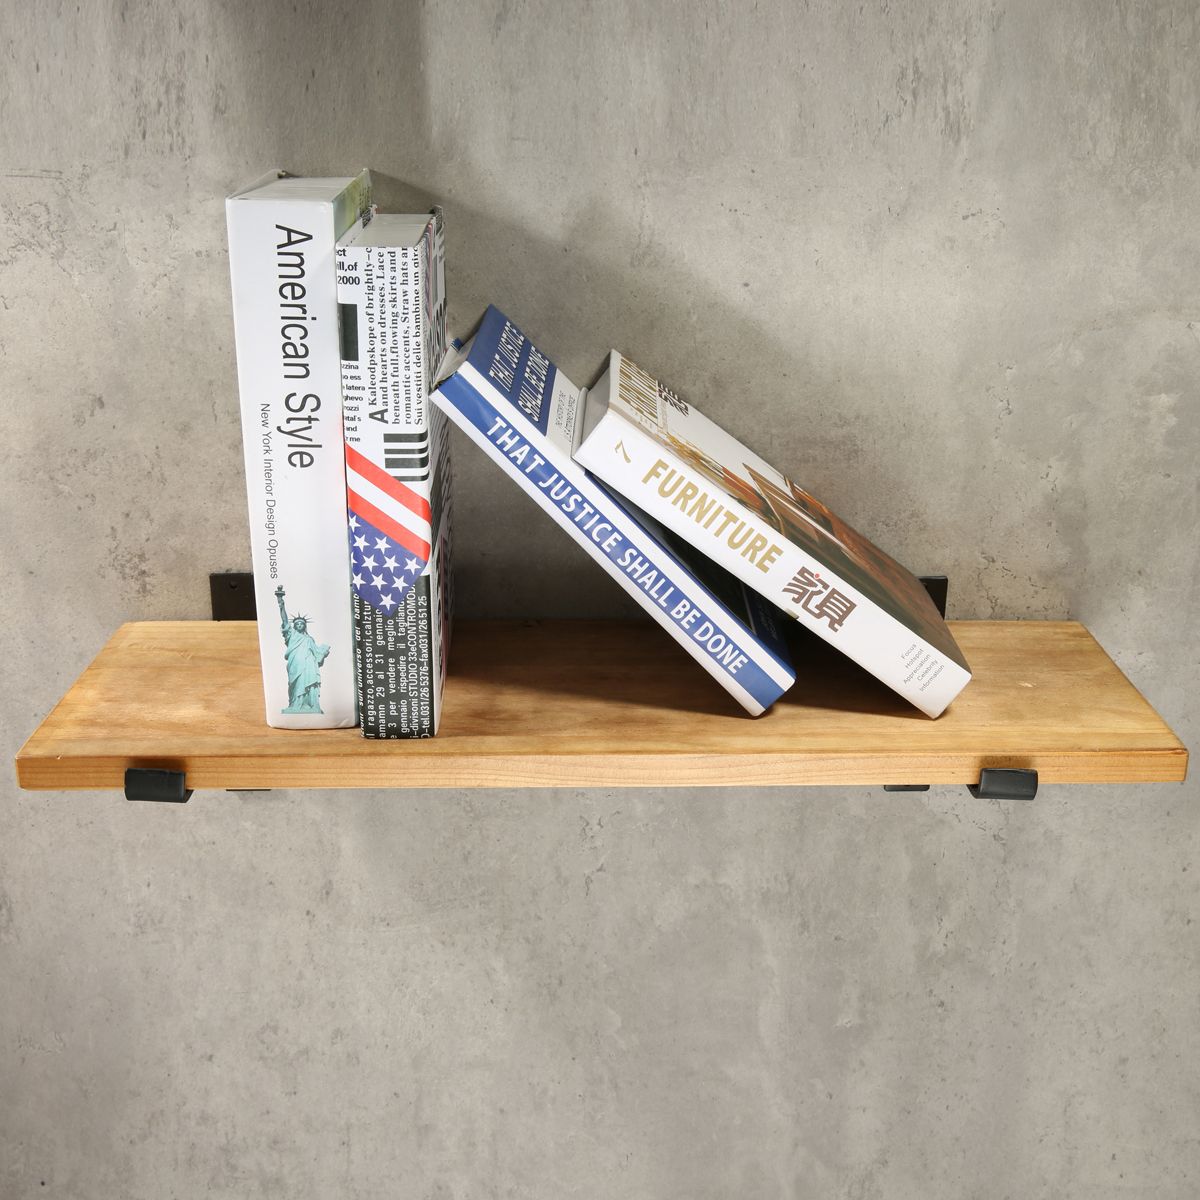 2Pcs-Industrial-Iron-Chunky-Solid-Wood-Shelf-Brackets-Matte-Black-Painting-for-Home-Shop-1212500